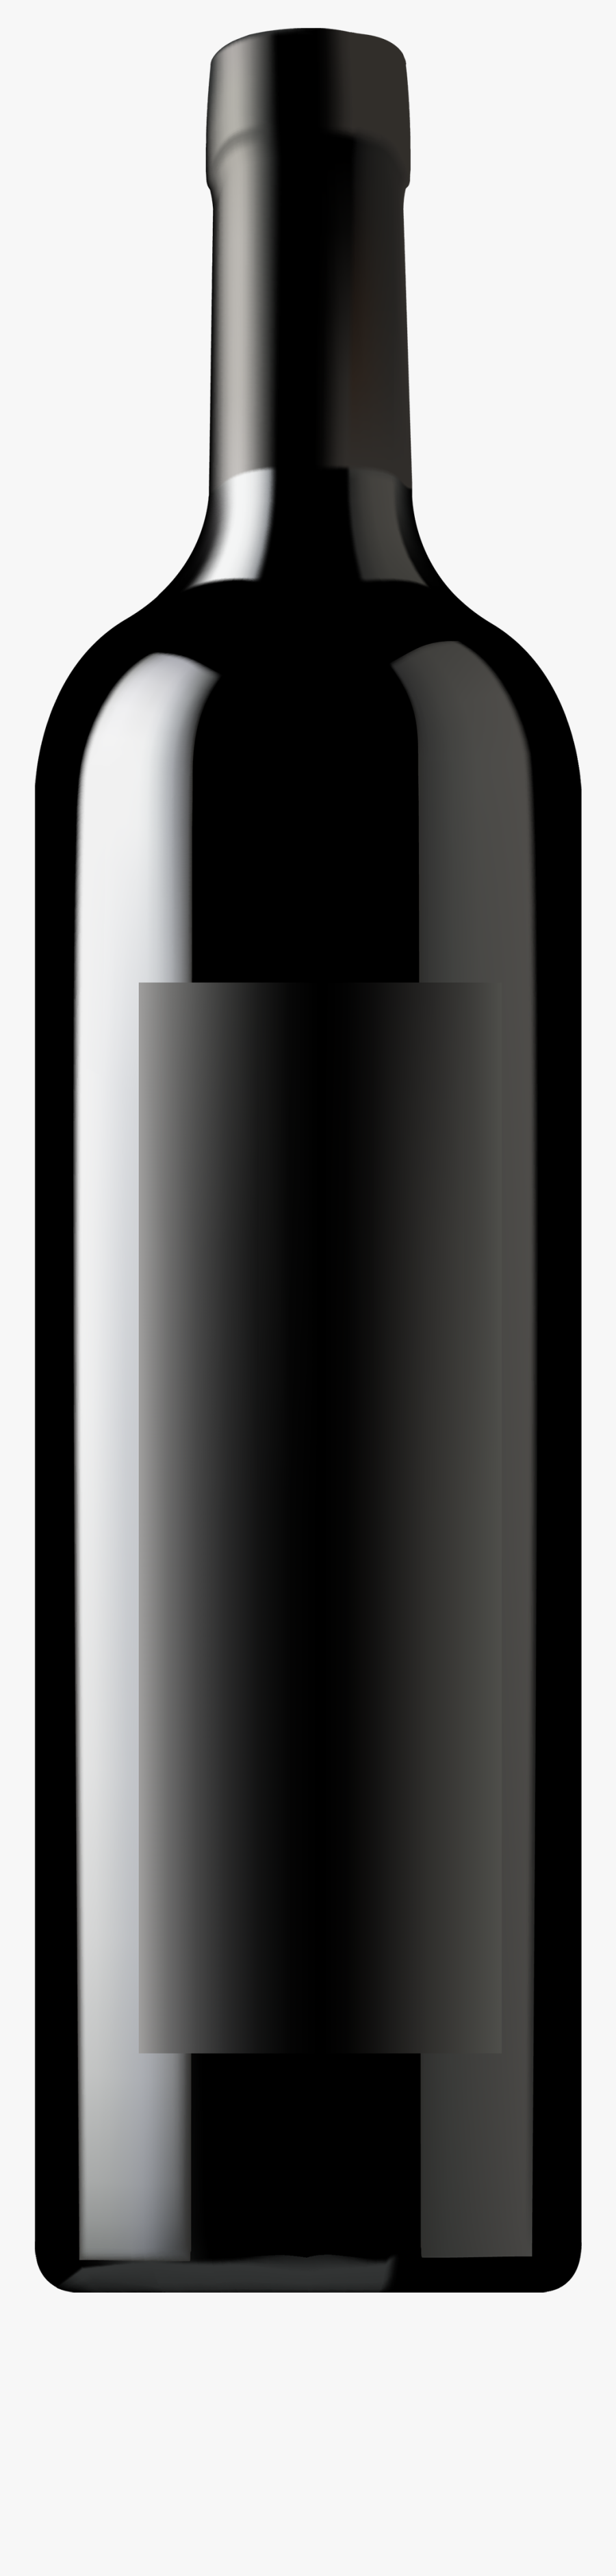 Transparent Water Bottle Clipart Black And White - Mobile Phone, Transparent Clipart